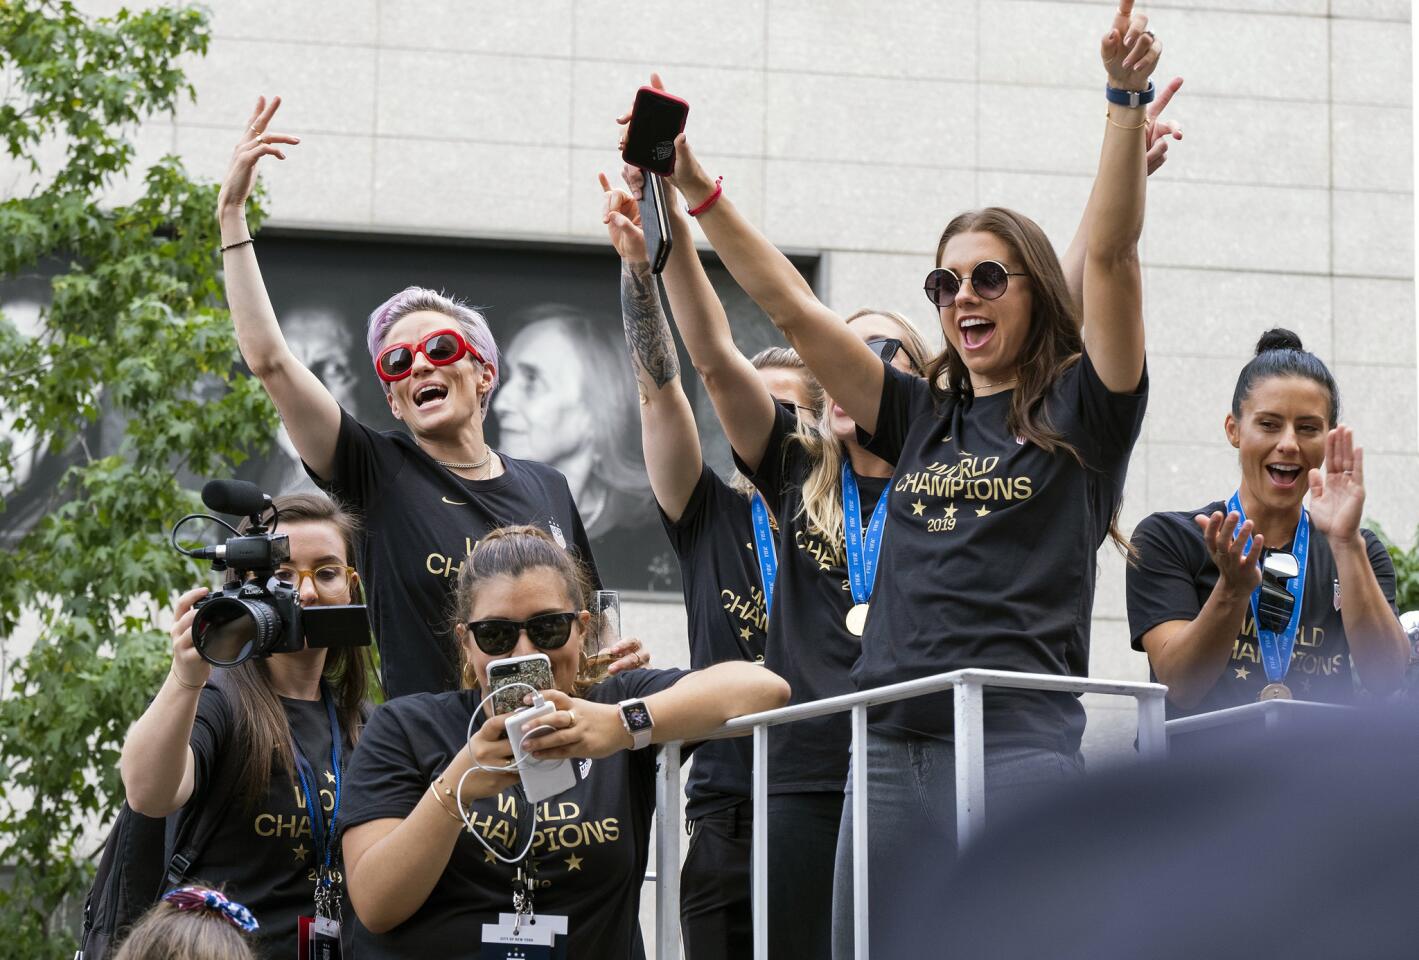 Members of the U.S. women's soccer team, including Megan Rapinoe, rear left, and Alex Morgan, right foreground, stand on a float before being honored with a ticker tape parade along the Canyon of Heroes in New York.